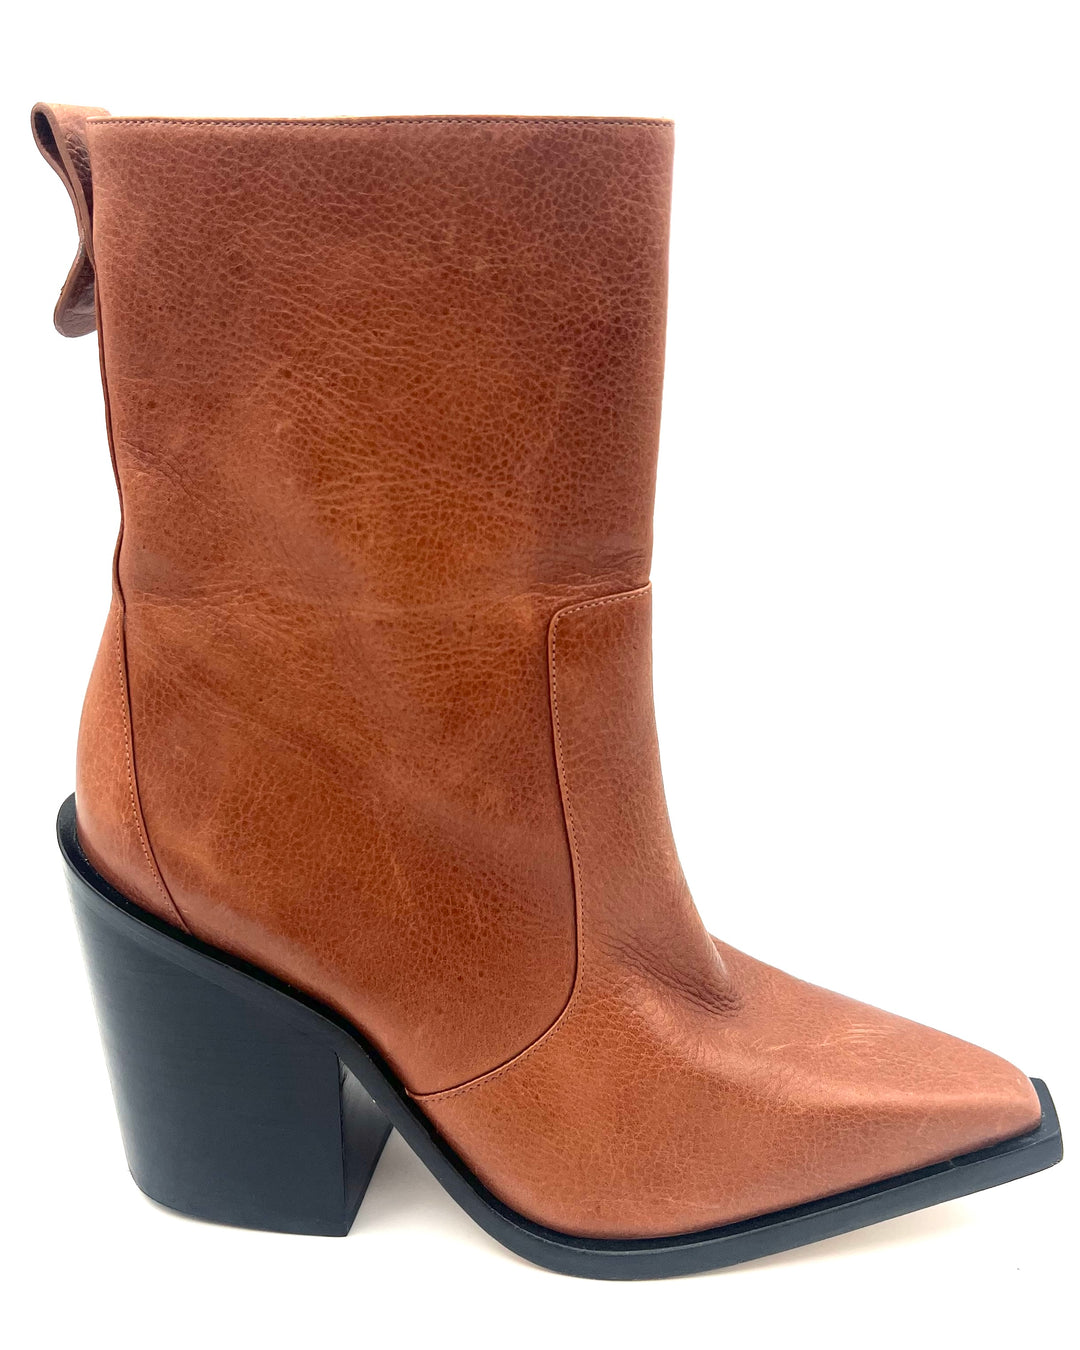 Caramel Brown Boots - Size 6.5